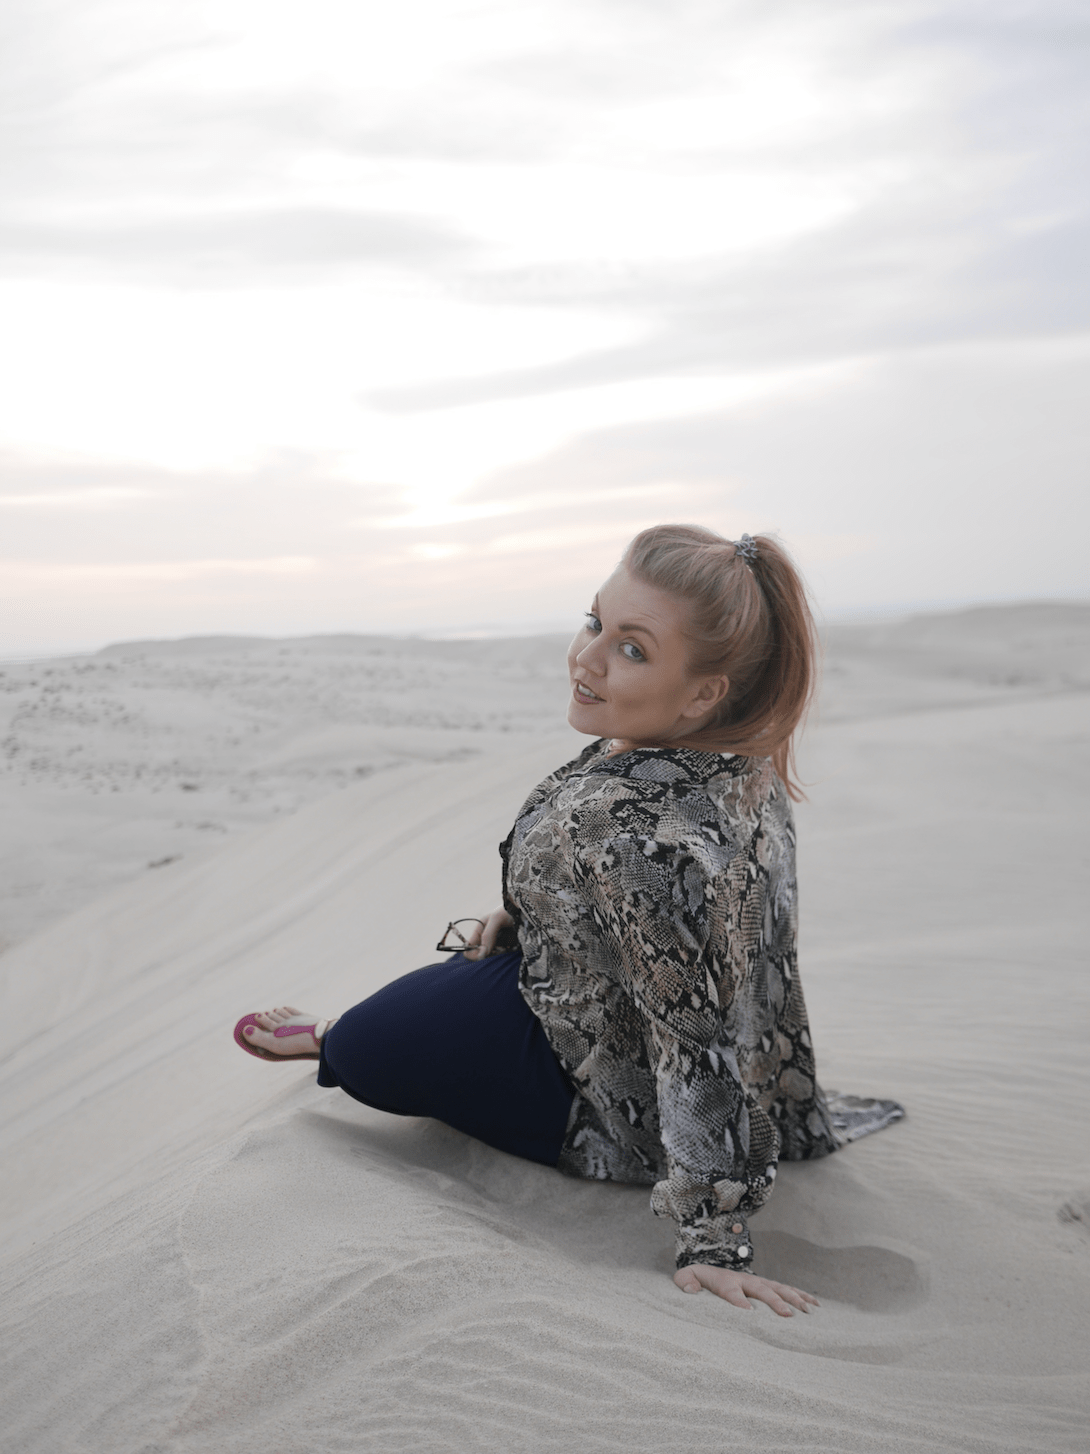 Desert Safari | Visit Qatar | Doha, the capital of Qatar is located in the Middle East and the World Cup 2022 location. Find out how I spent 4 days on my visit to Qatar | Travel Guide & Tips | Elle Blonde Luxury Lifestyle Destination Blog